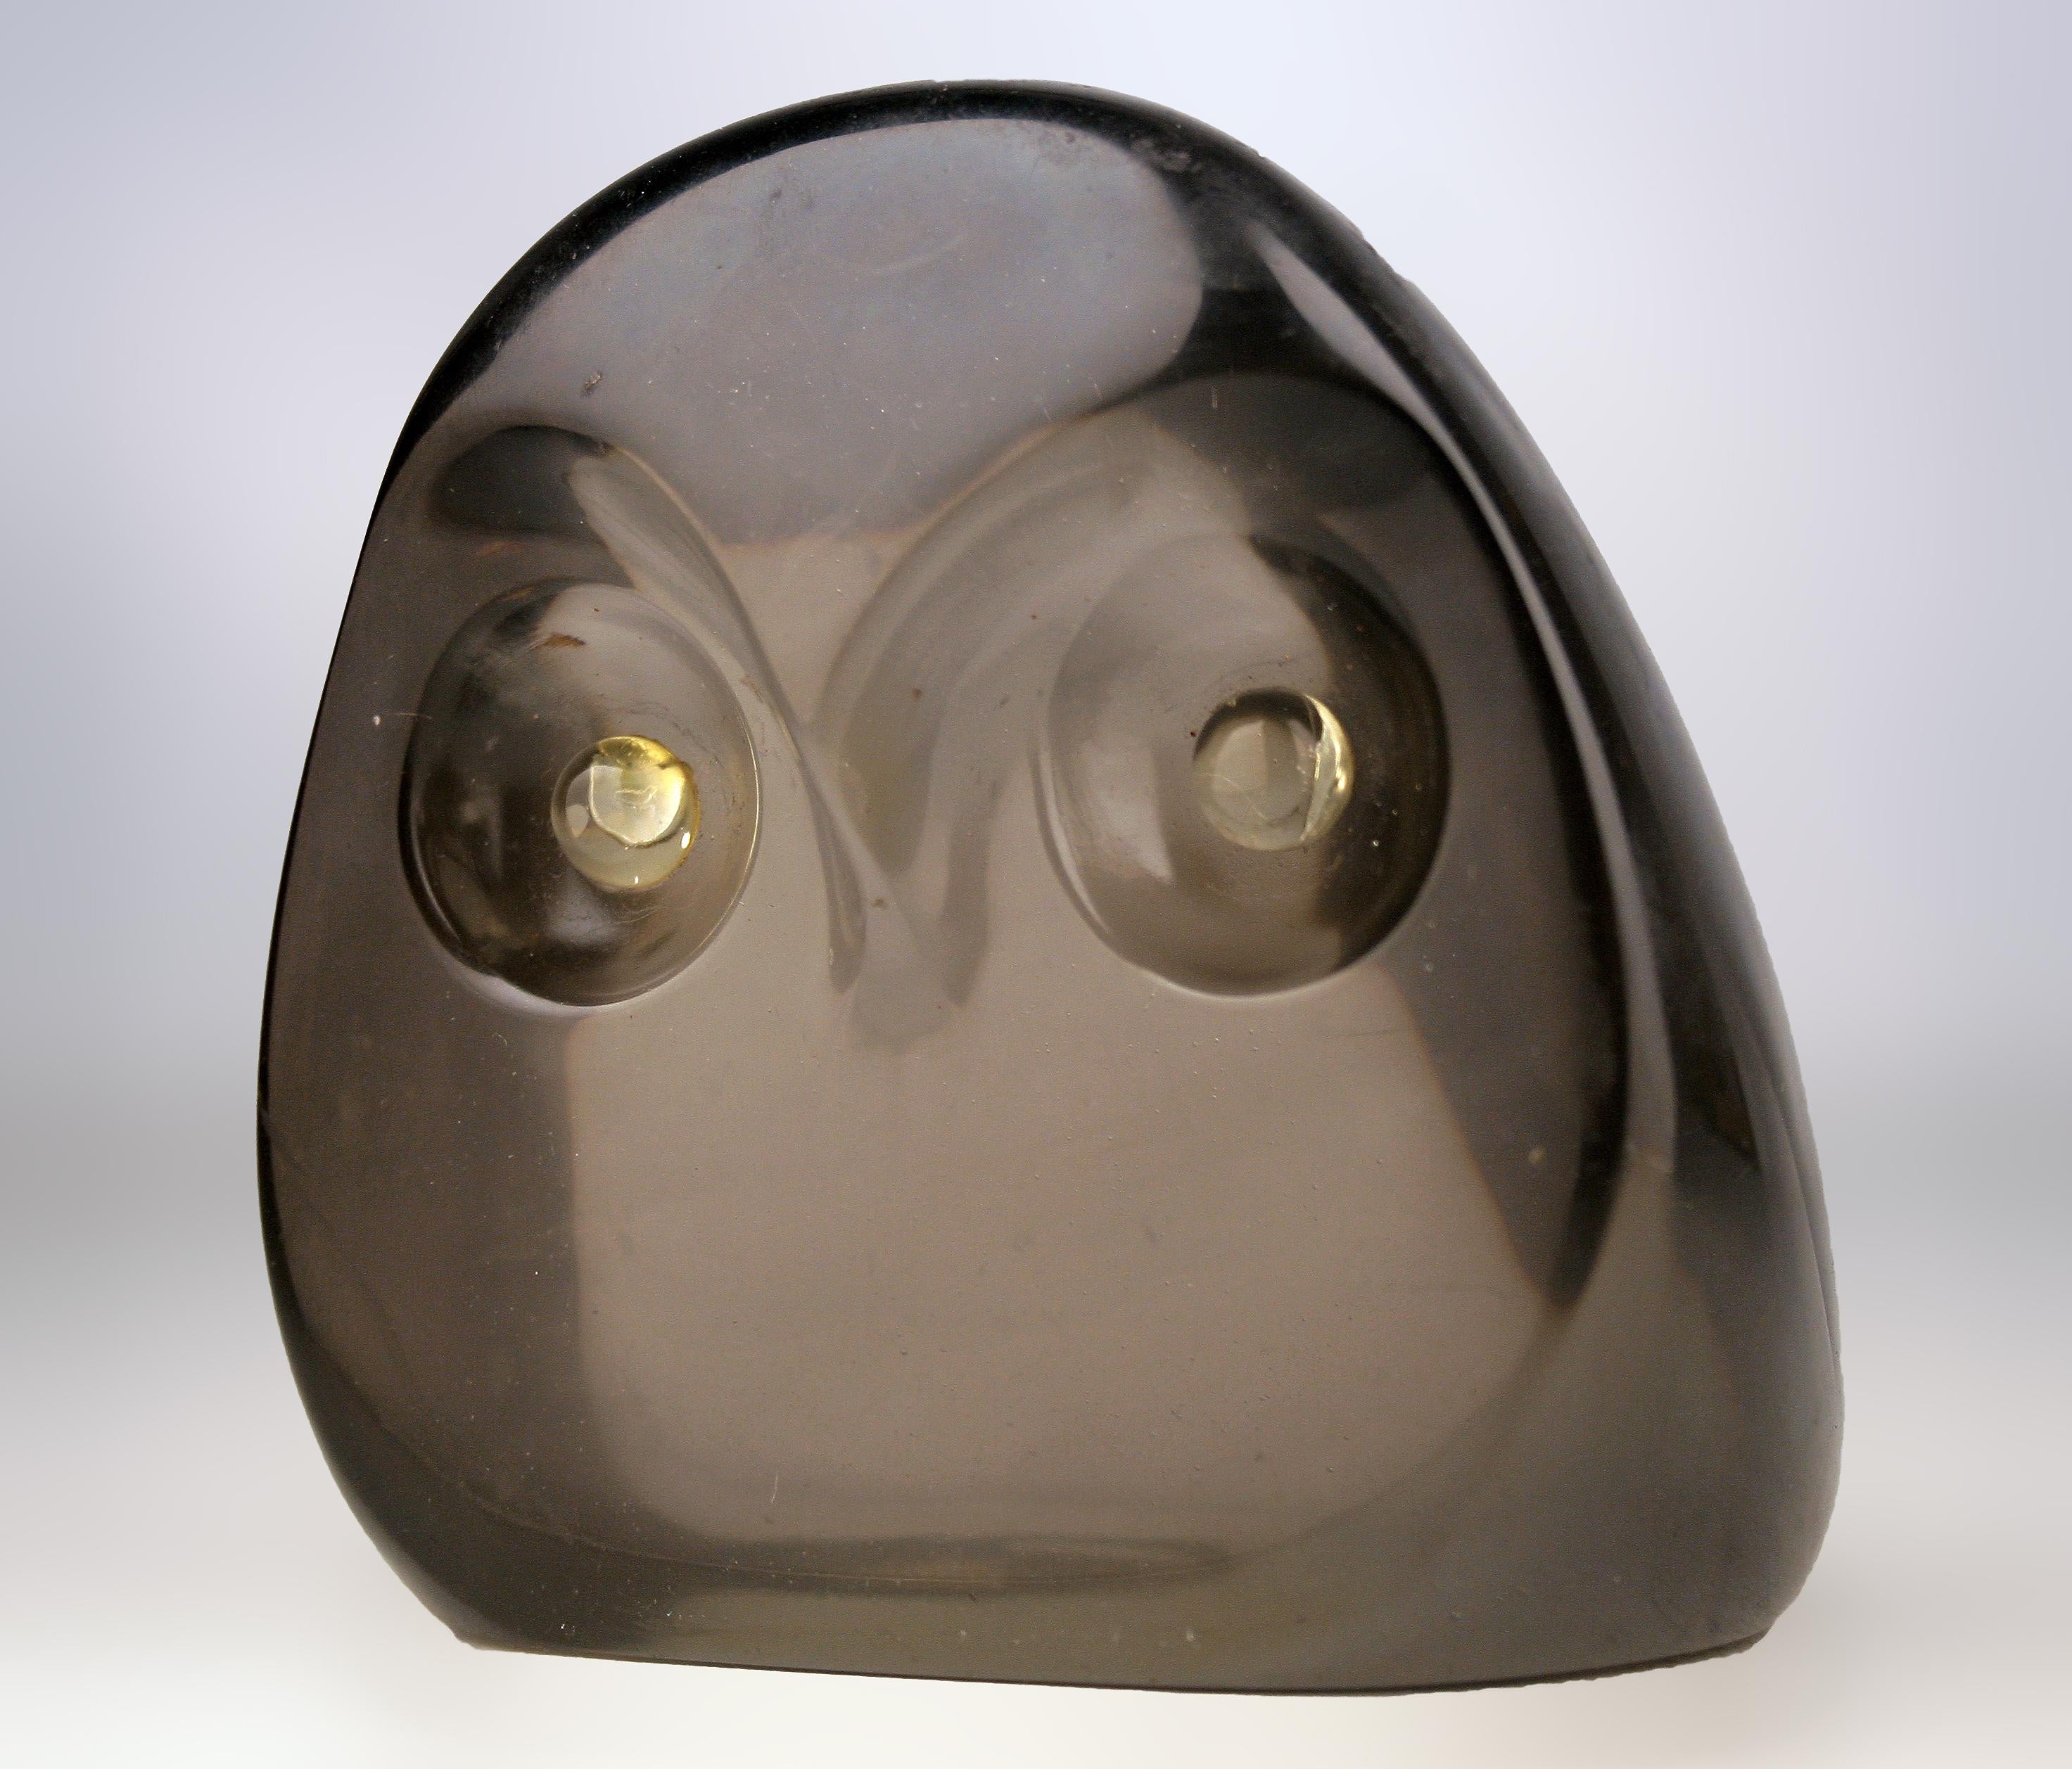 Space Age Palatnik-like brazilian Op Art acrylic/lucite monochromatic translucent owl sculpture/paperweight by Aldemir Martins, Brazil

By: Aldemir Martins, Abraham Palatnik (in the style of)
Material: acrylic, lucite, synthetic
Technique: polished,